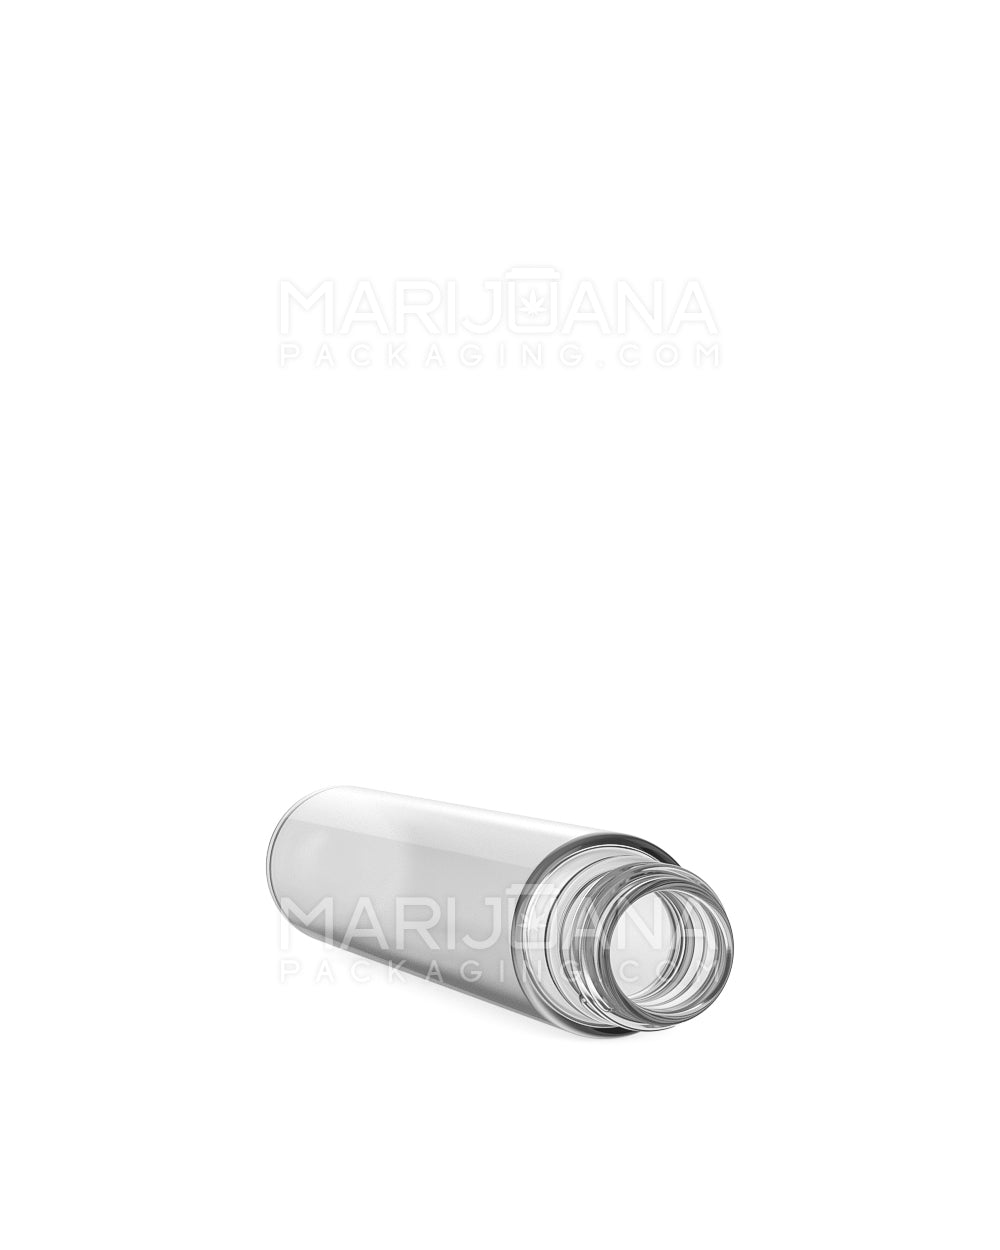 Child Resistant | Plastic Pre-Roll Tubes | 22mm - 120mm - 400 Count - 3